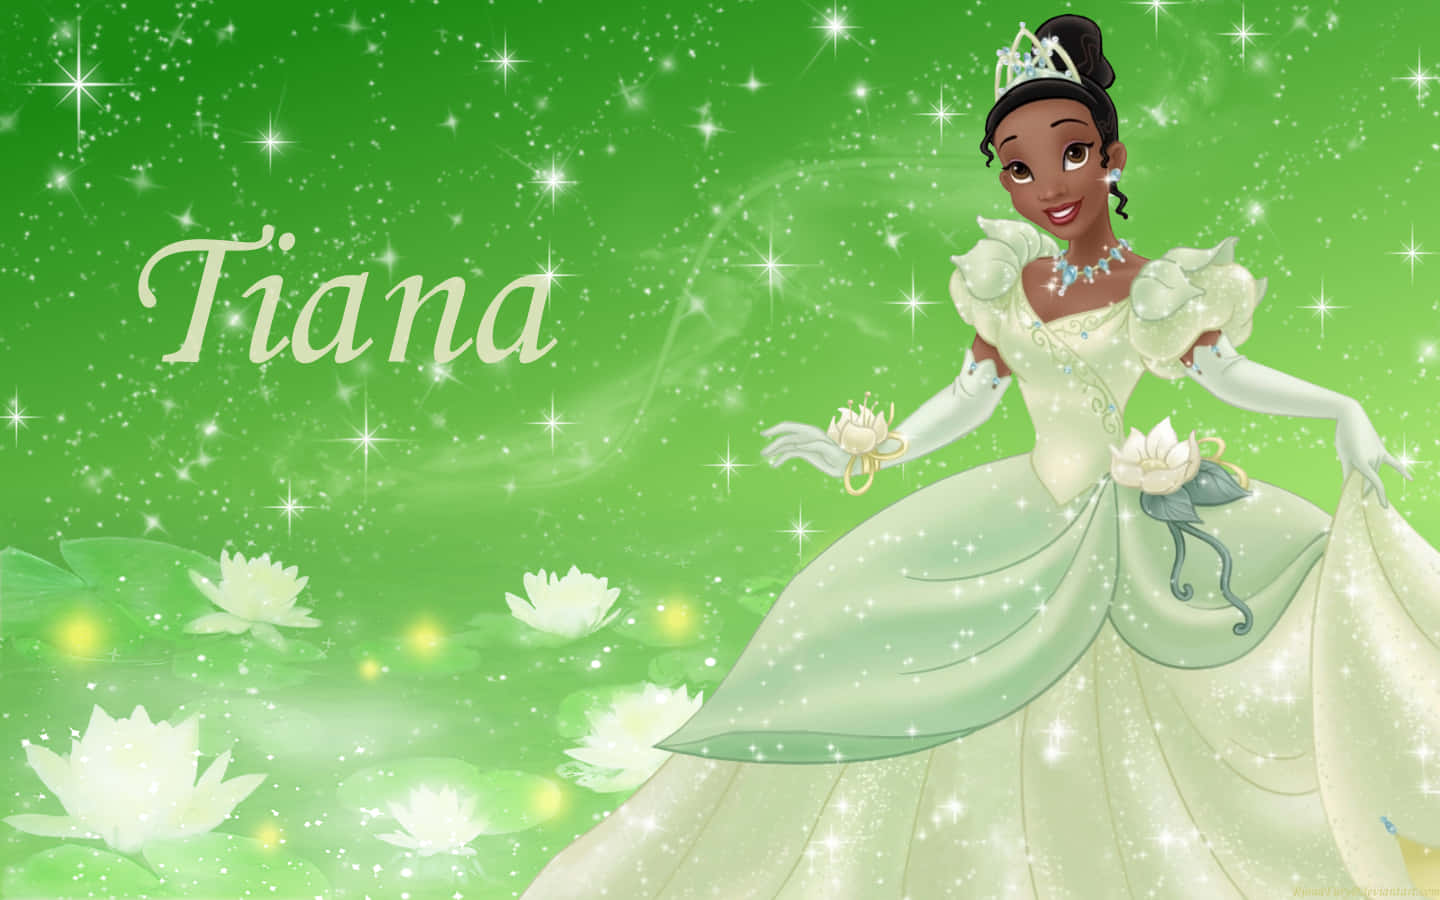 "Fairytale Princess Tiana with her loyal friend, Frog in the Swamps of New Orleans"